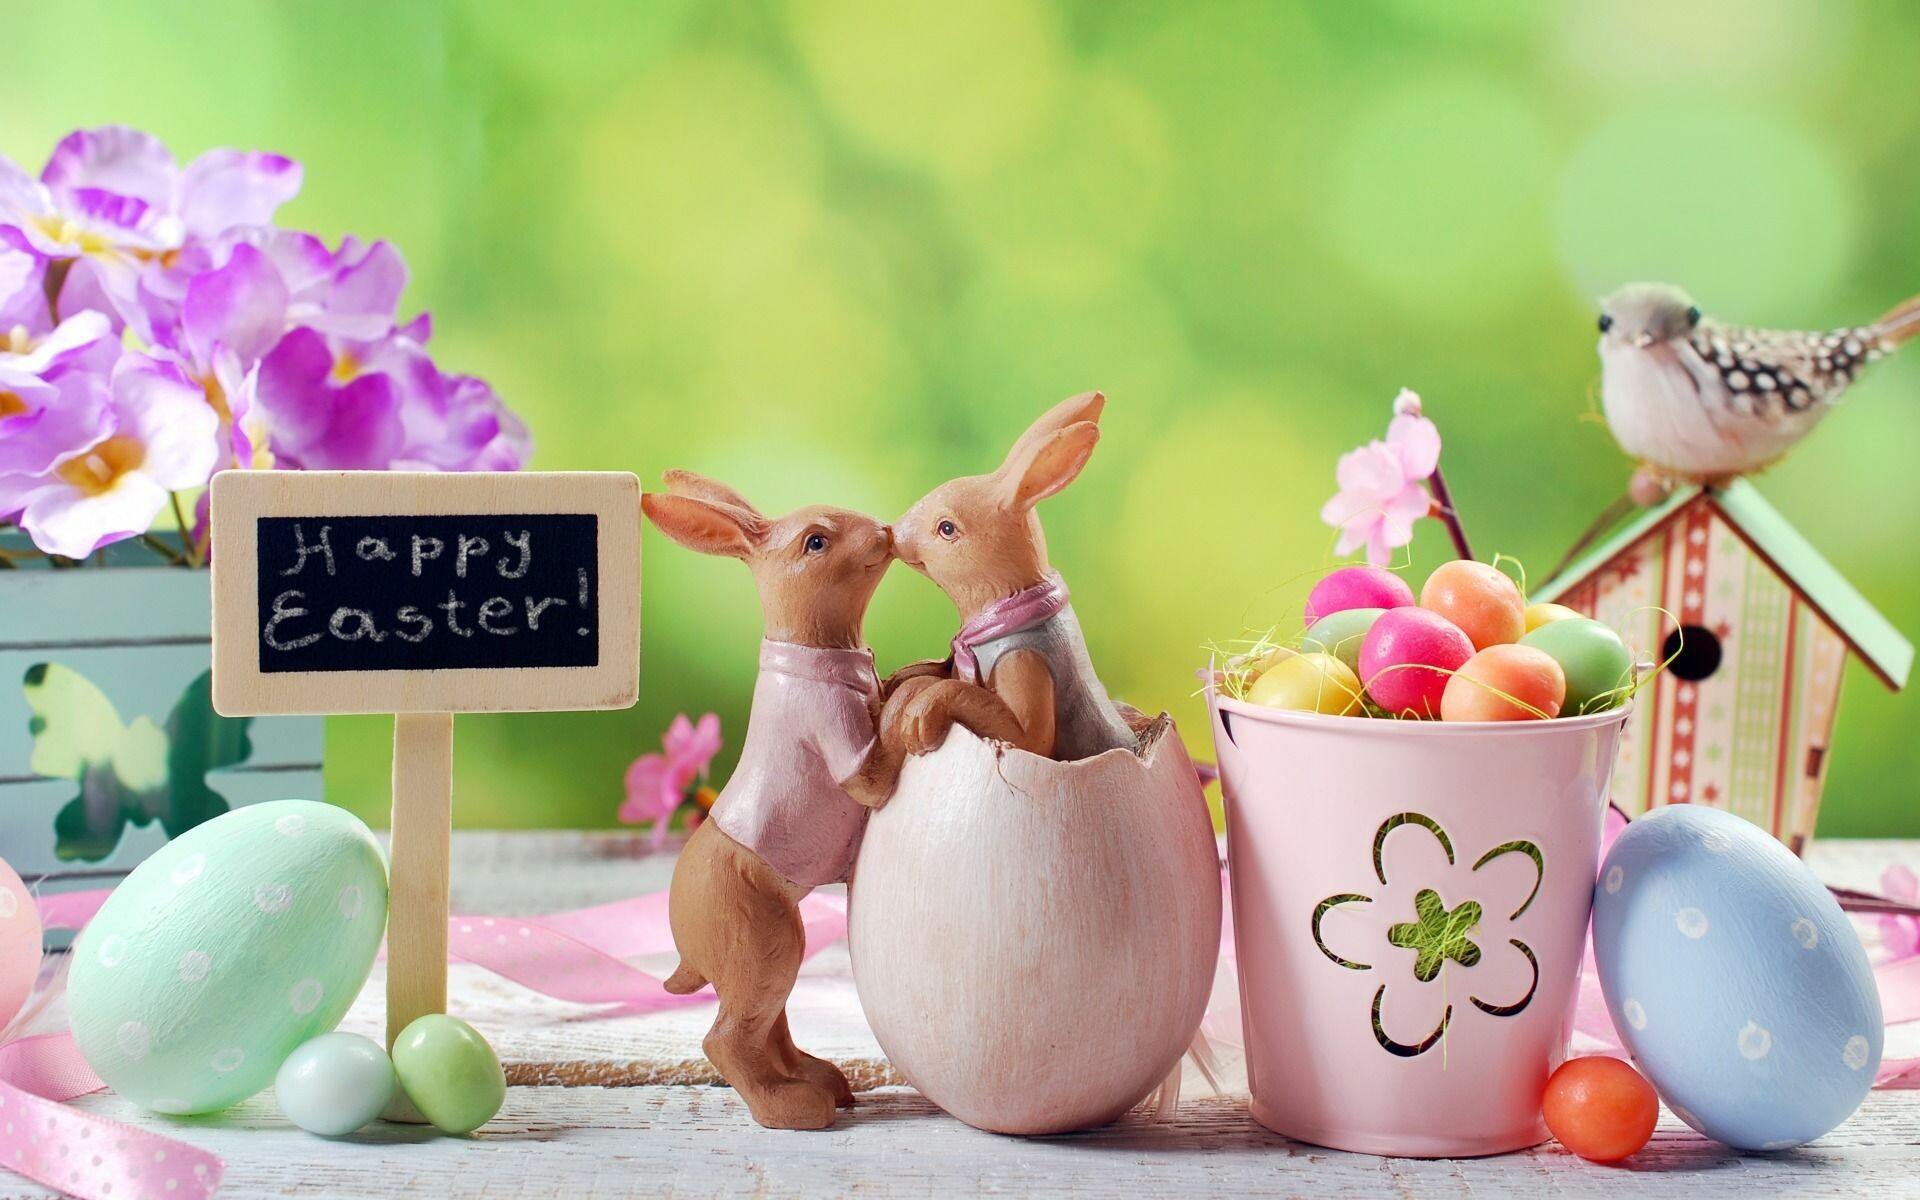 Easter: The eggs on the holiday symbolize new life and resurrection. 1920x1200 HD Wallpaper.